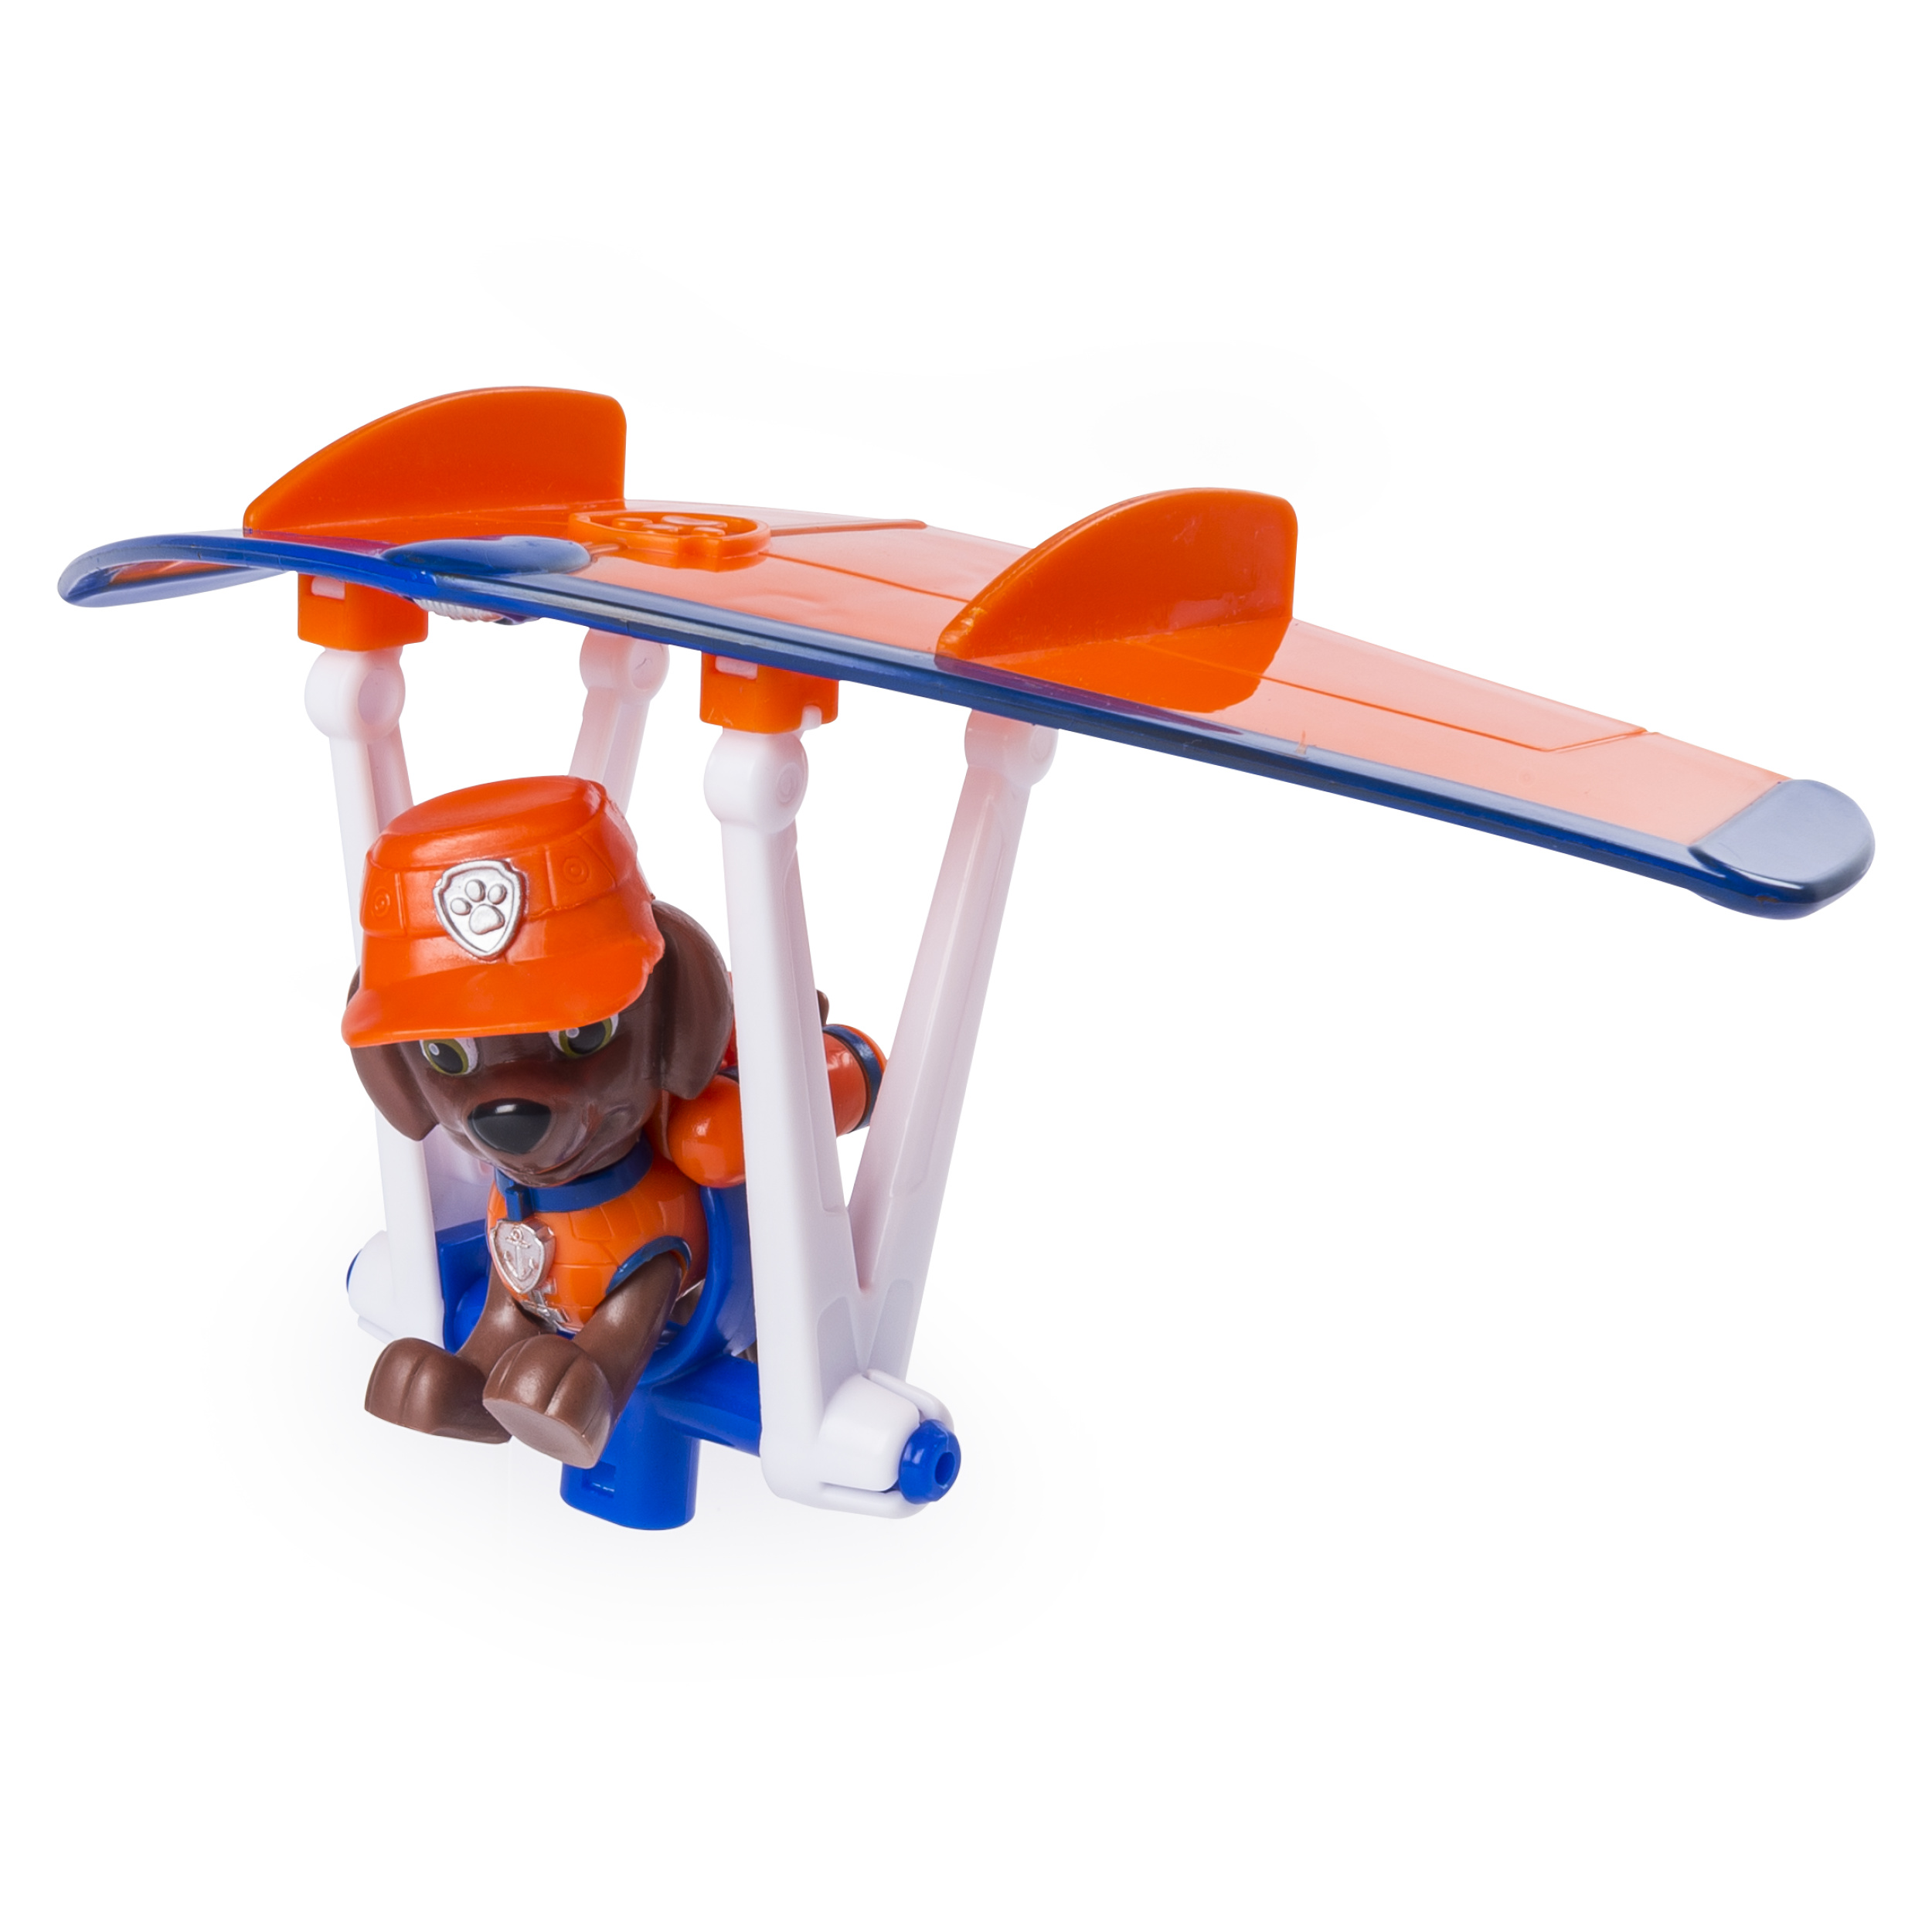 PAW Patrol Ultimate Rescue, Zuma’s Mini Hang Glider with Collectible Figure for Ages 3 and Up - image 3 of 6